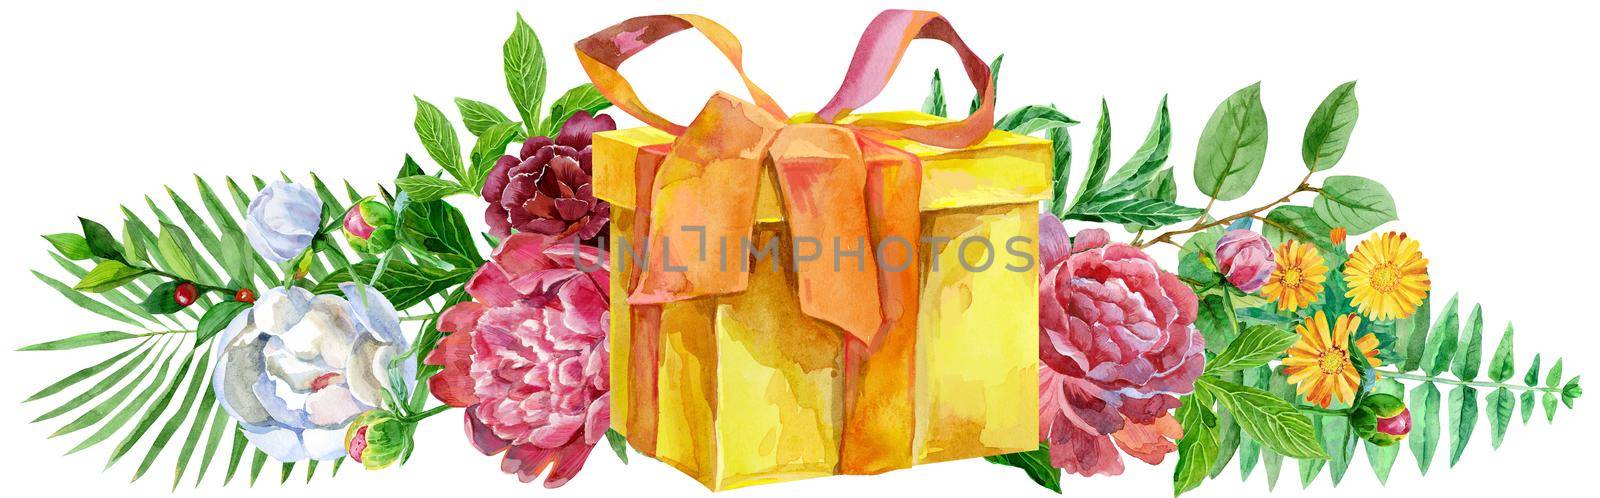 Watercolor llustration with yellow gift box and peonies. For design, print or background by NataOmsk